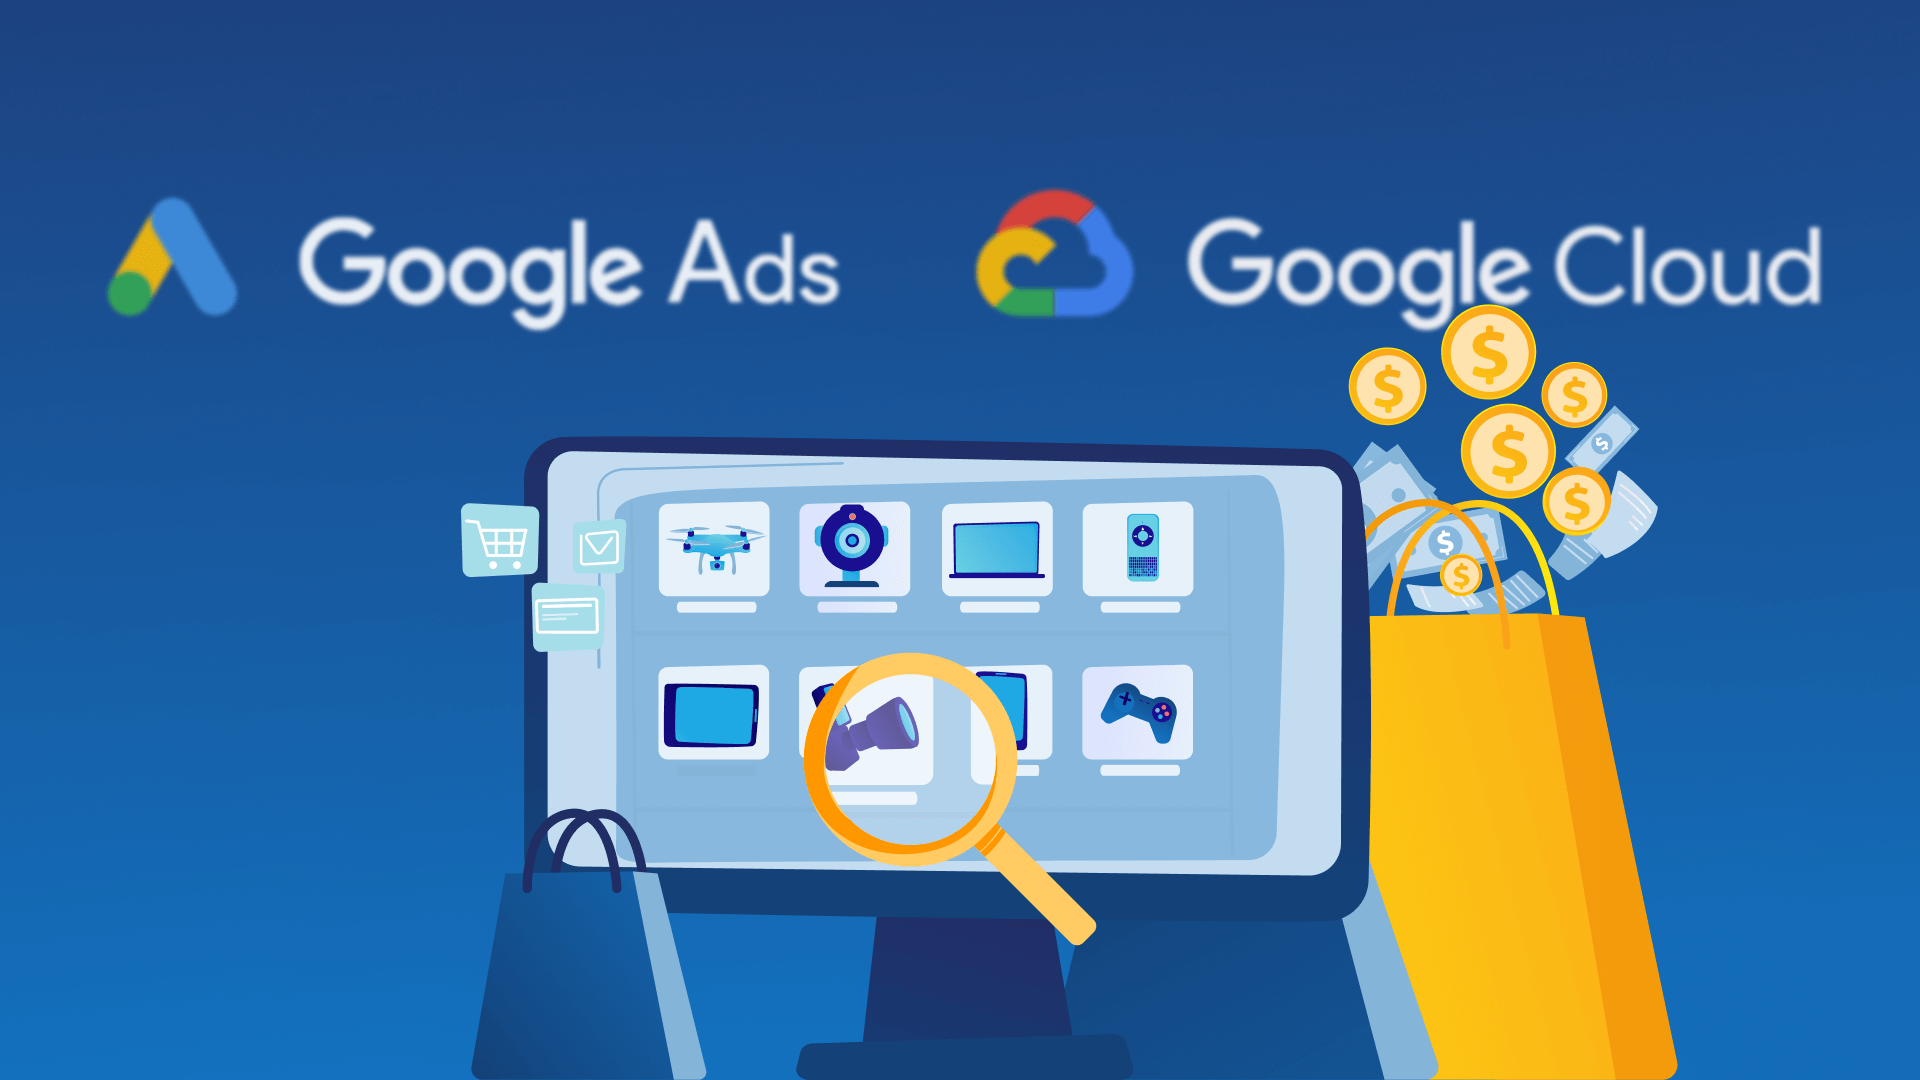 Check product availability using Google Cloud Function and Google Ads Script